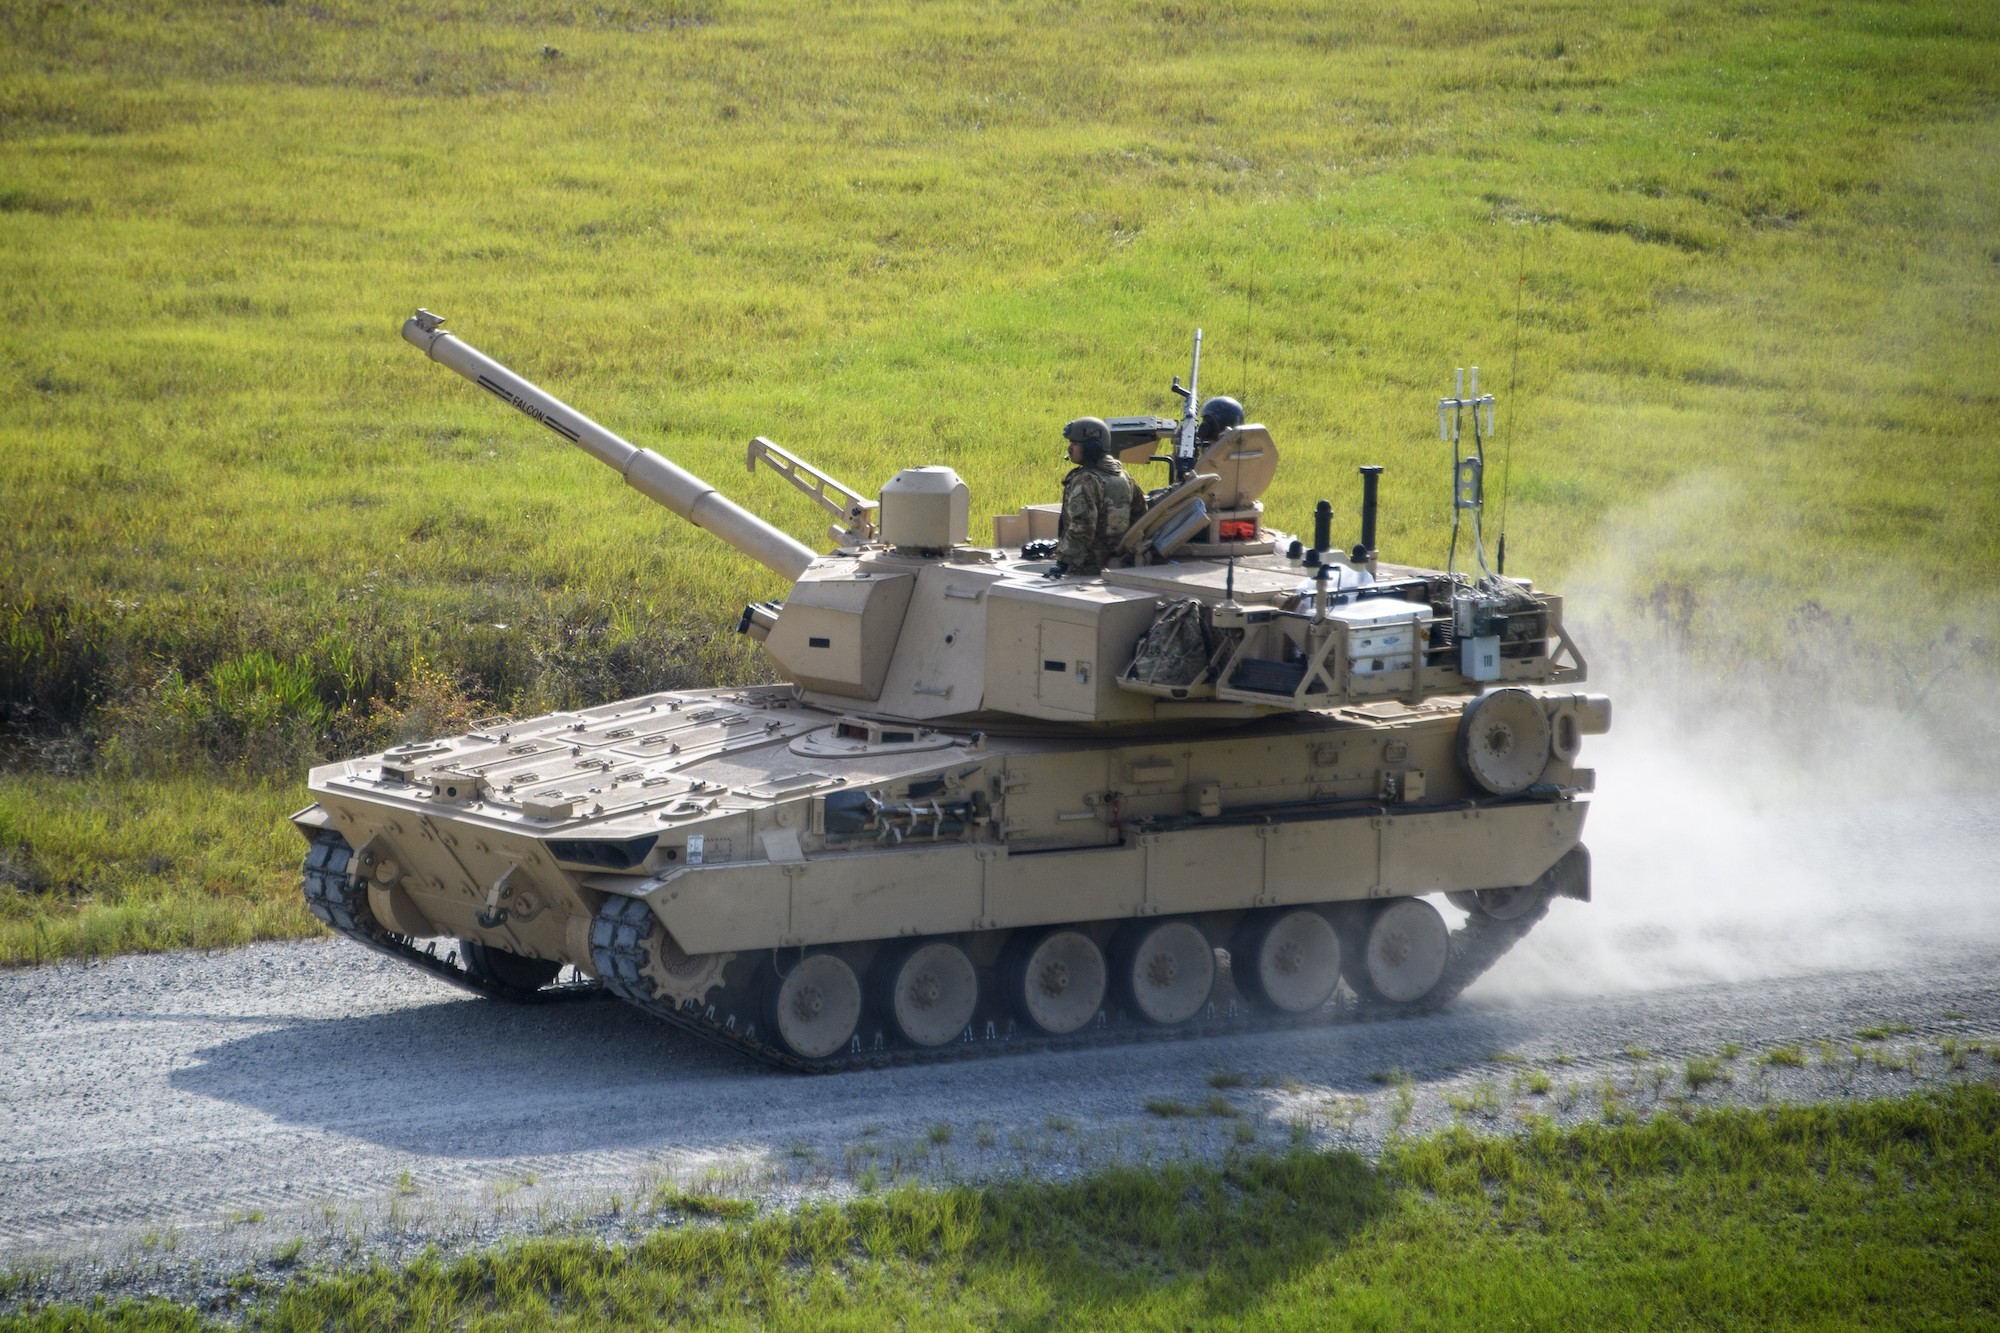 The M10 Booker combat vehicle.